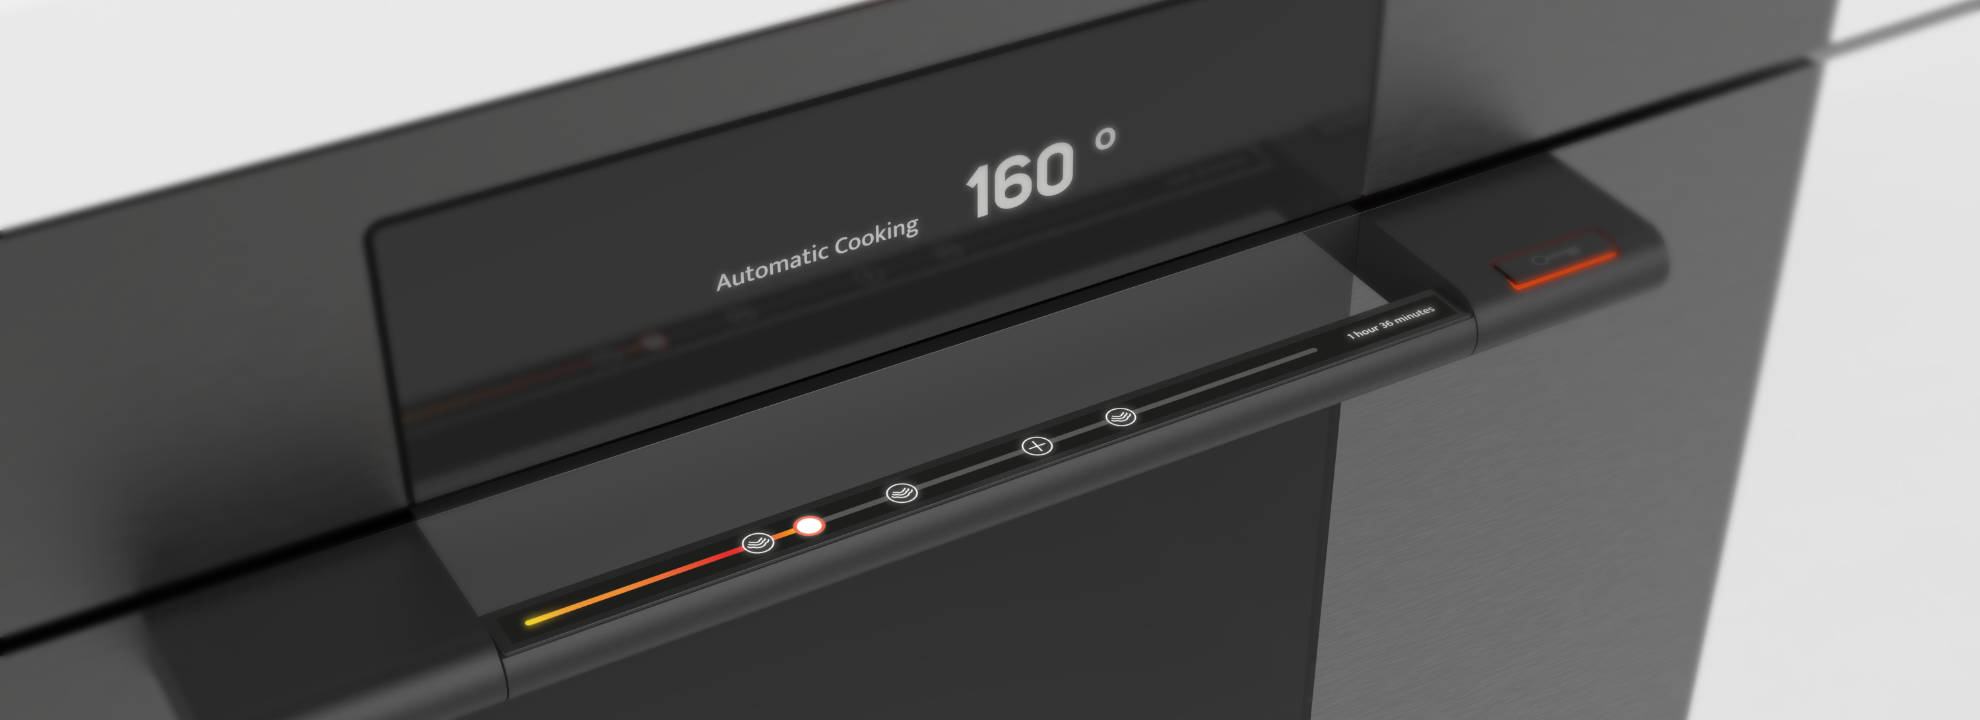 oven handle flexible viewing angle